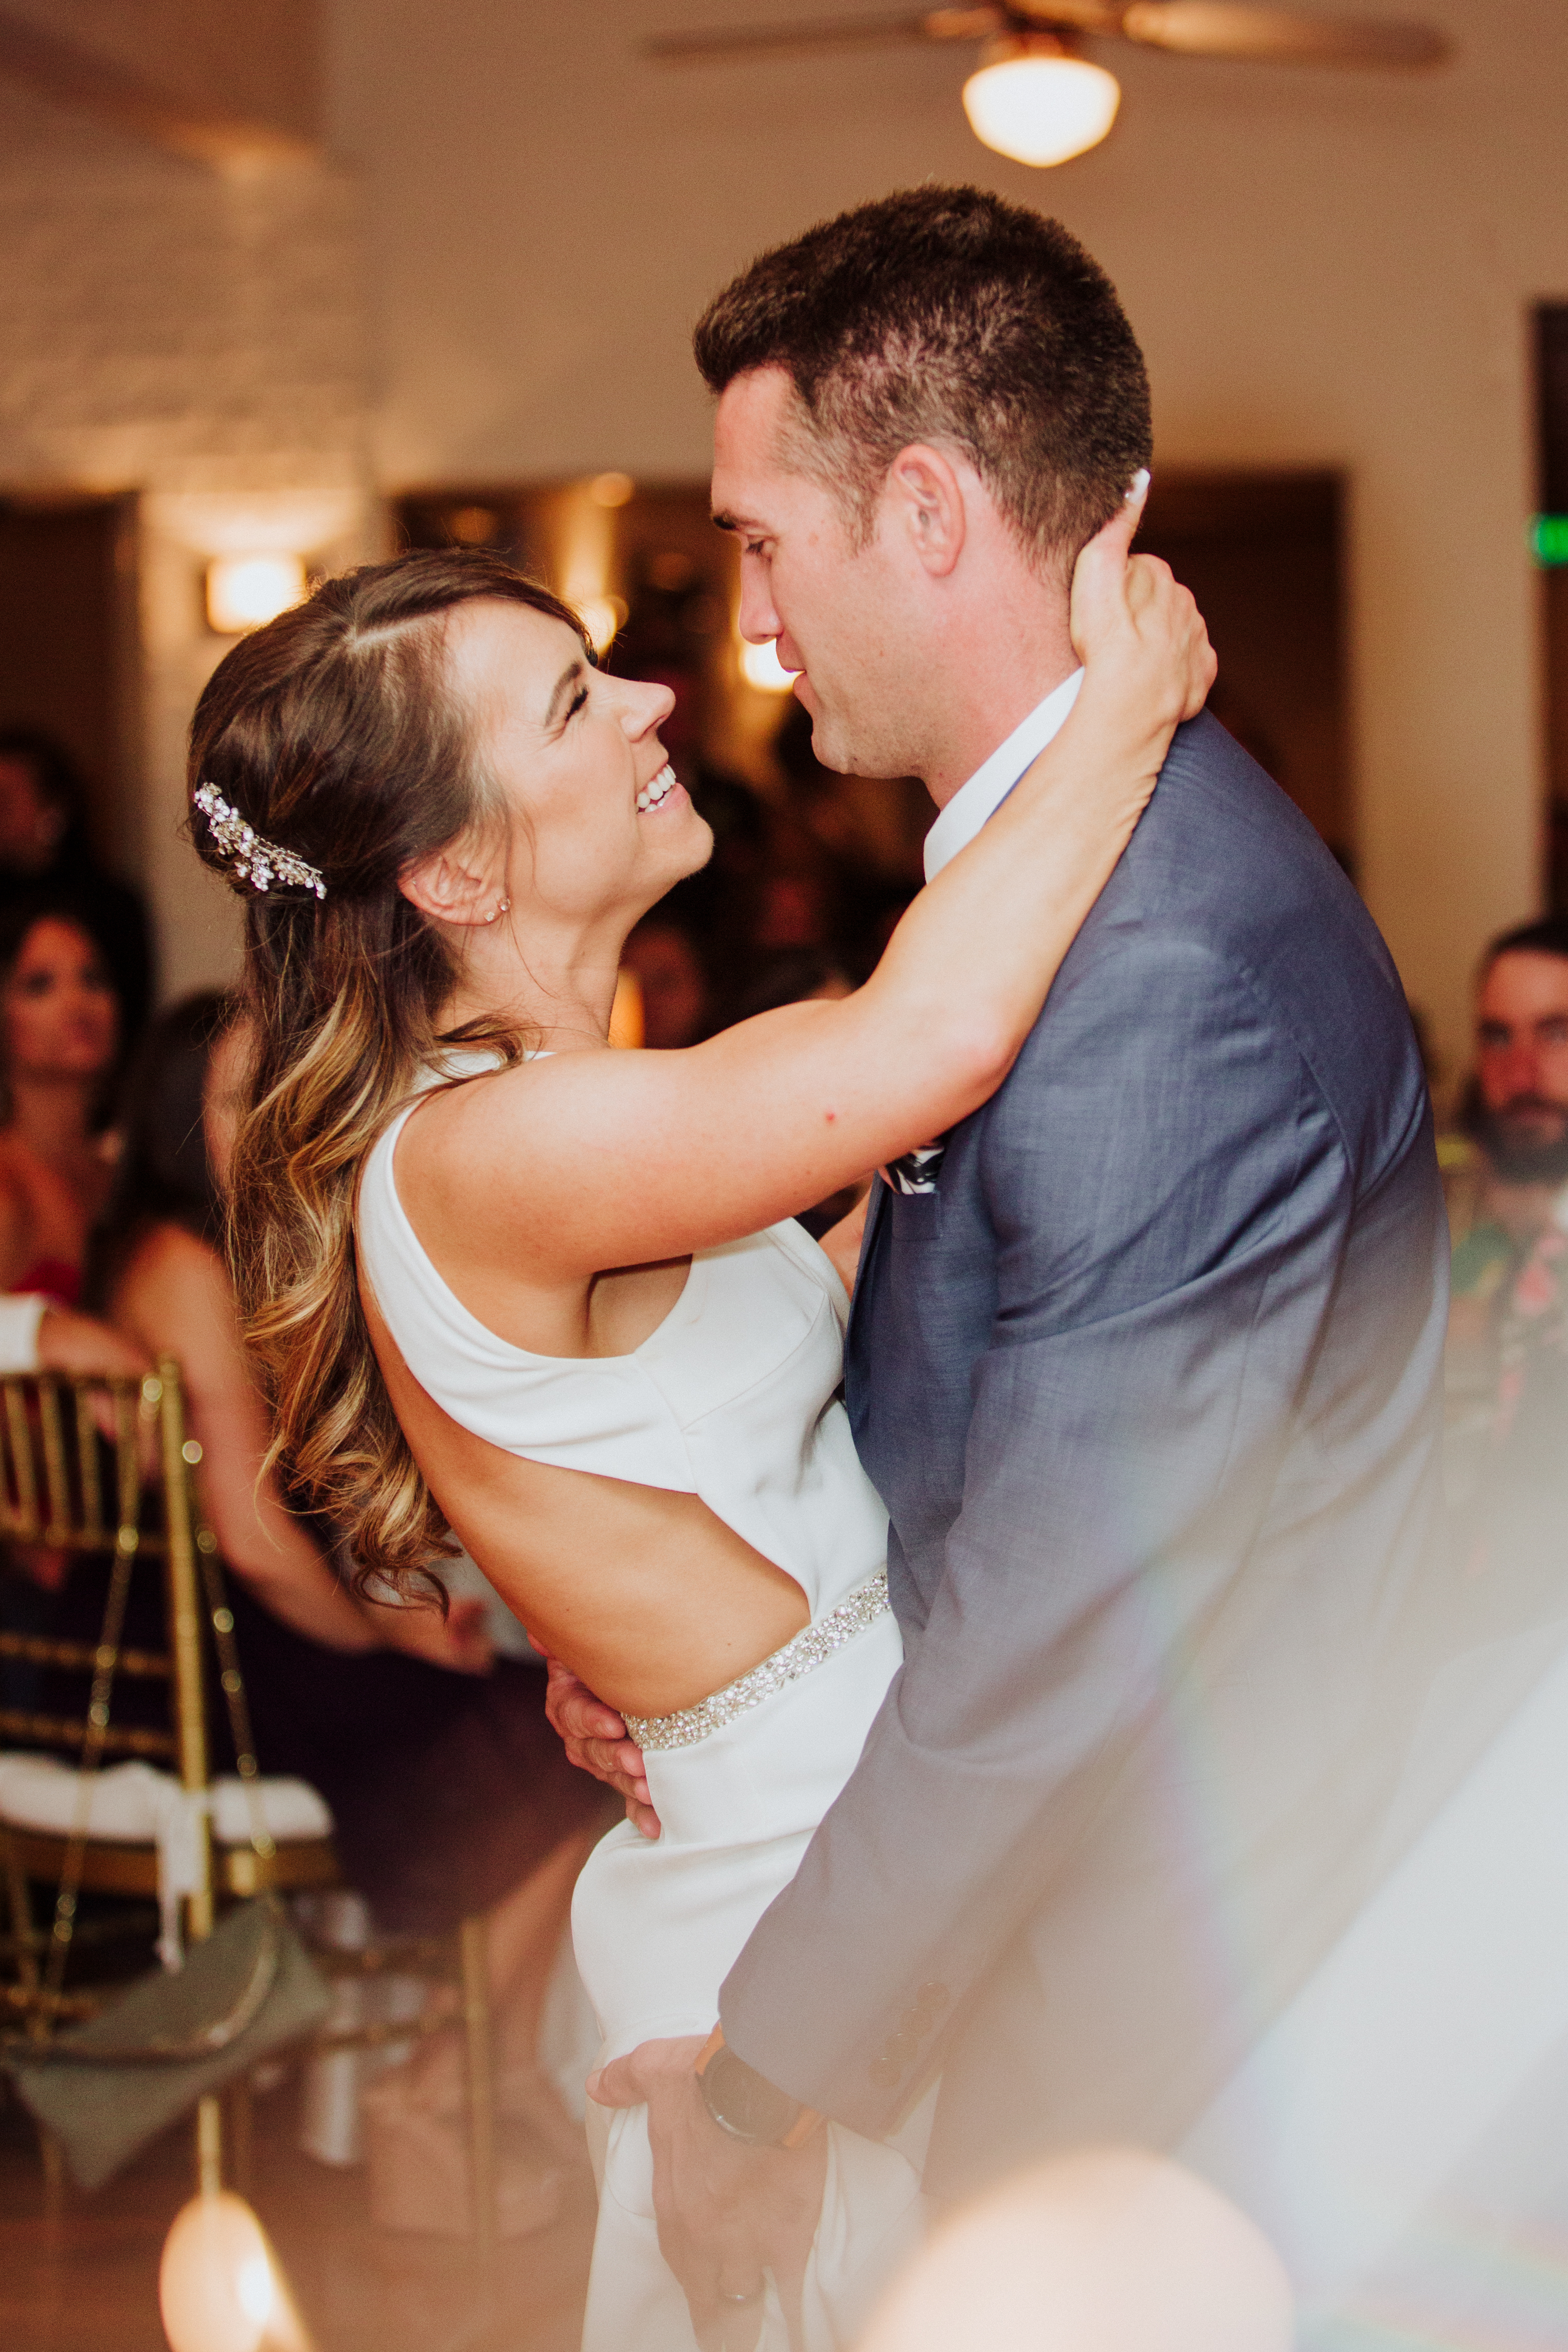 Bride and groom first danceat a Romantic Style San Diego Wedding at Marina Village by Kylie Rae Photography